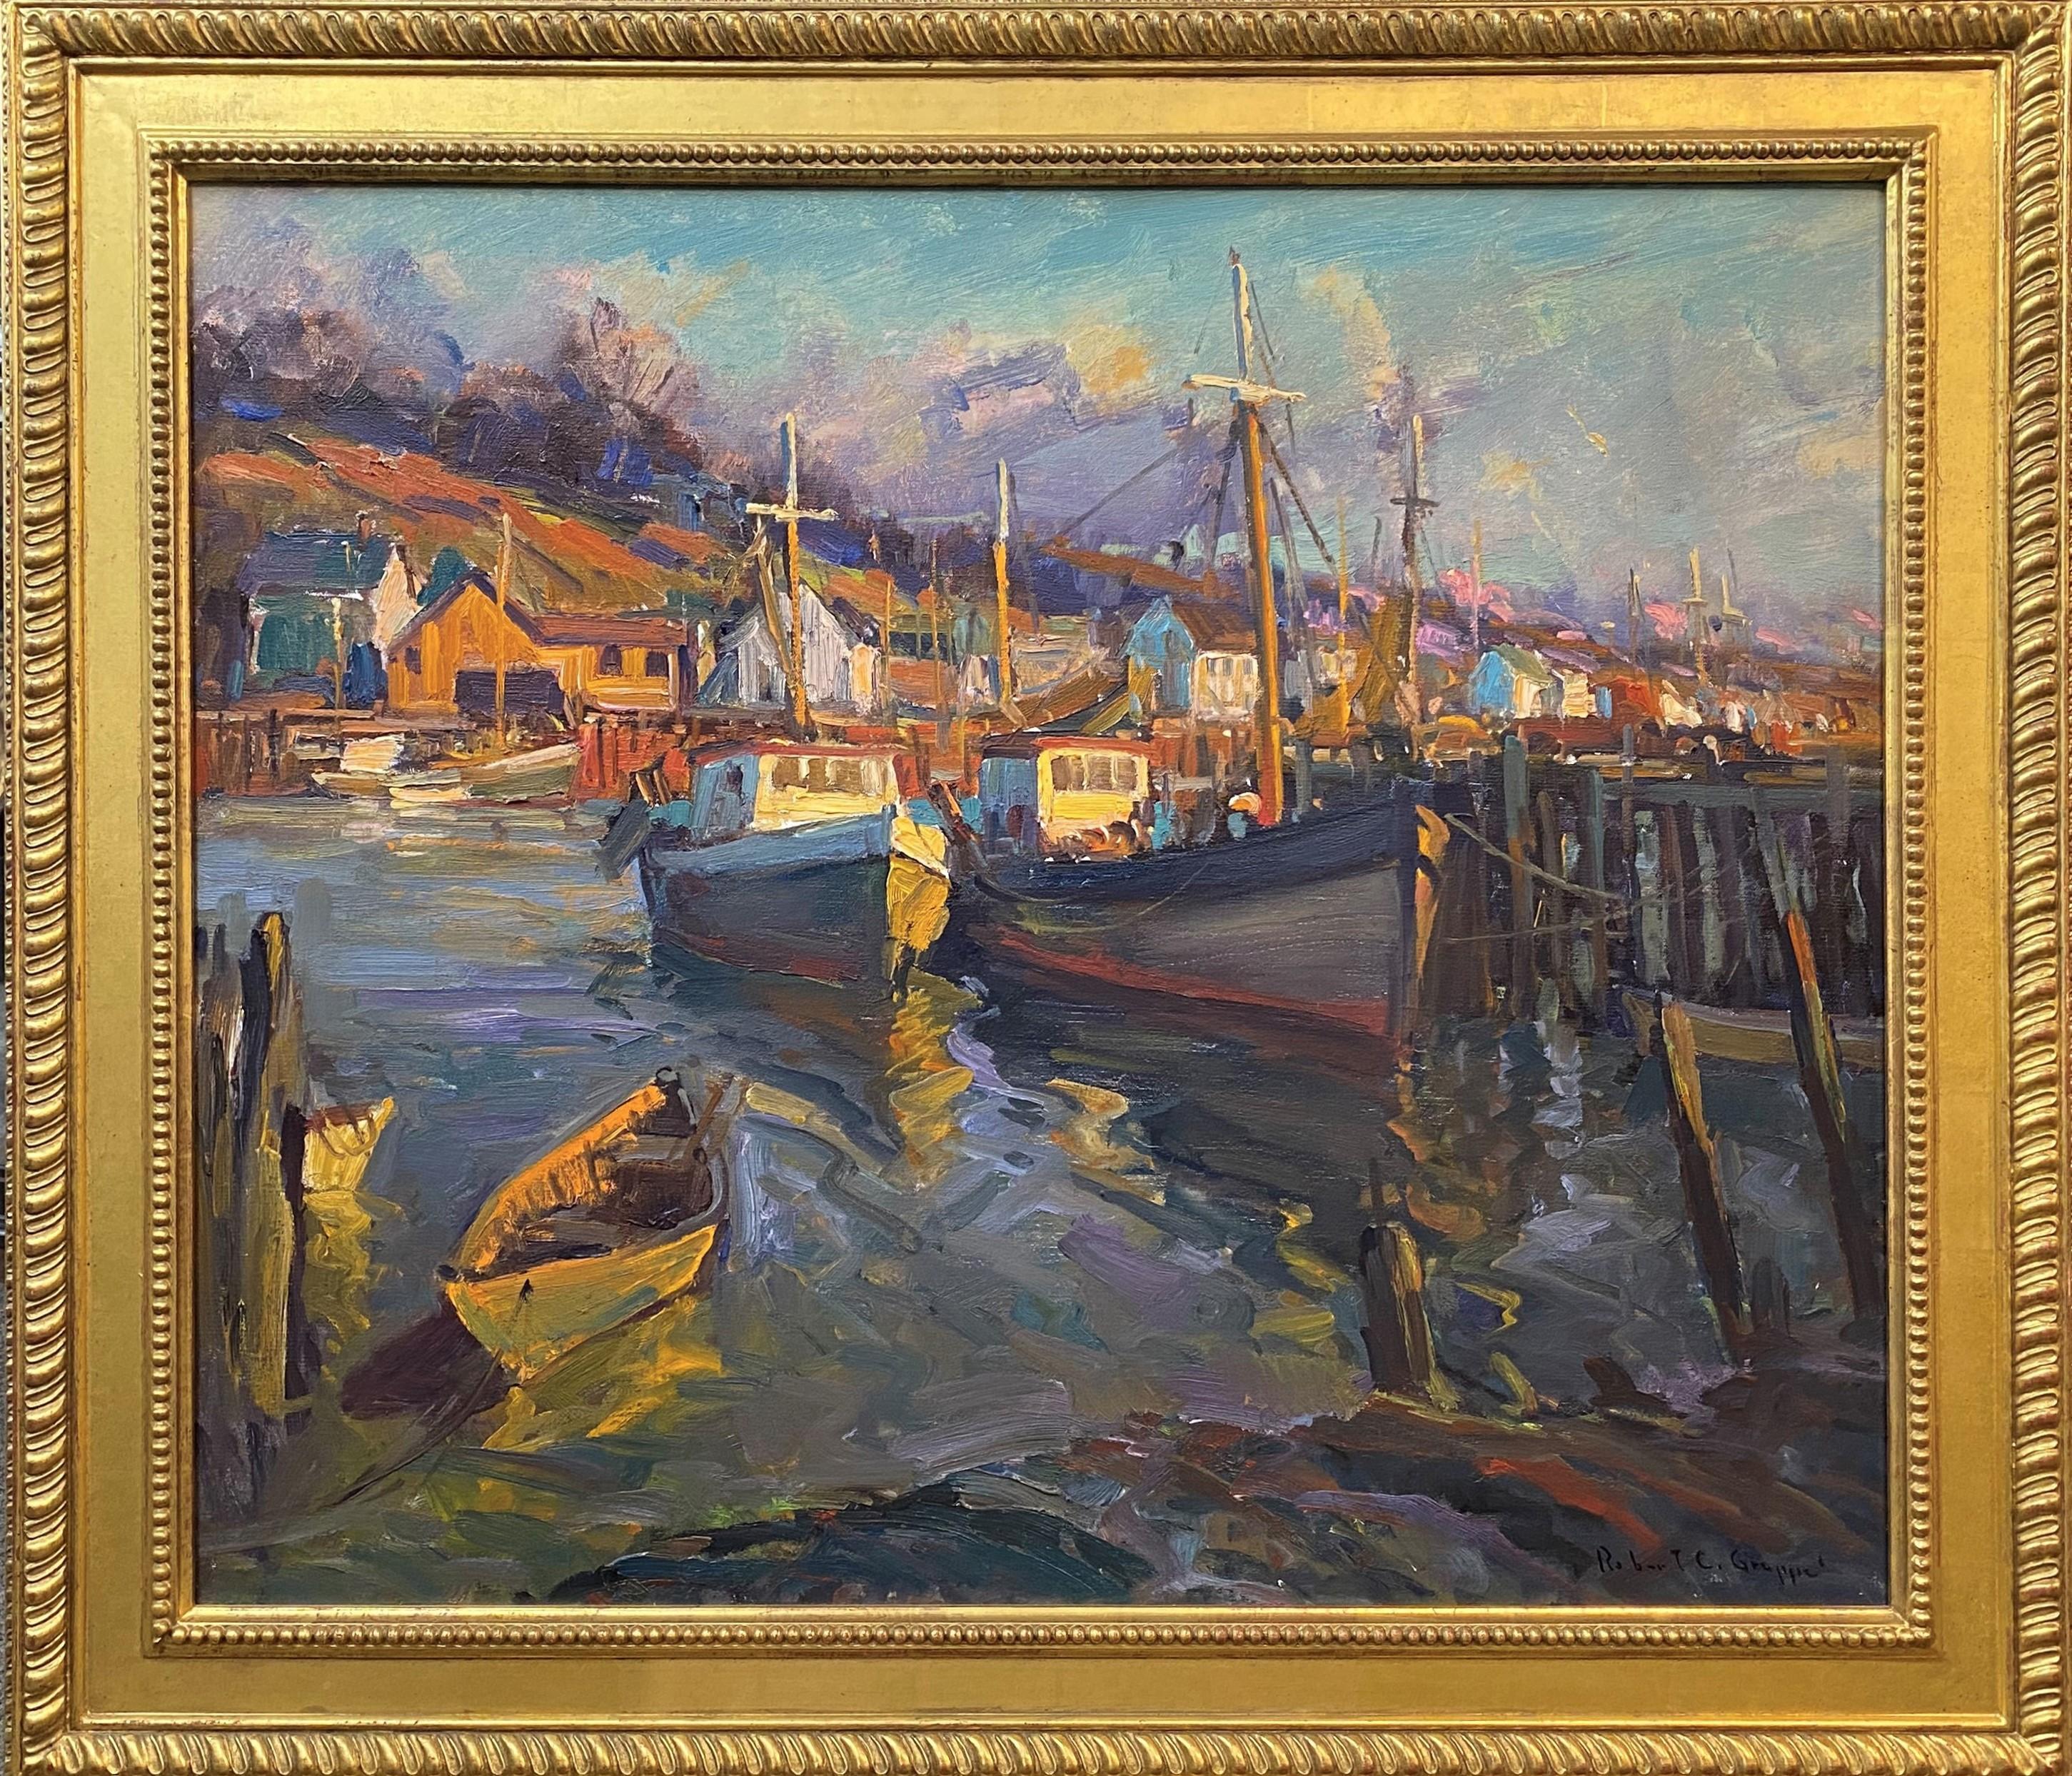 Smith's Cove at Sunset - Art by Robert Charles Gruppe